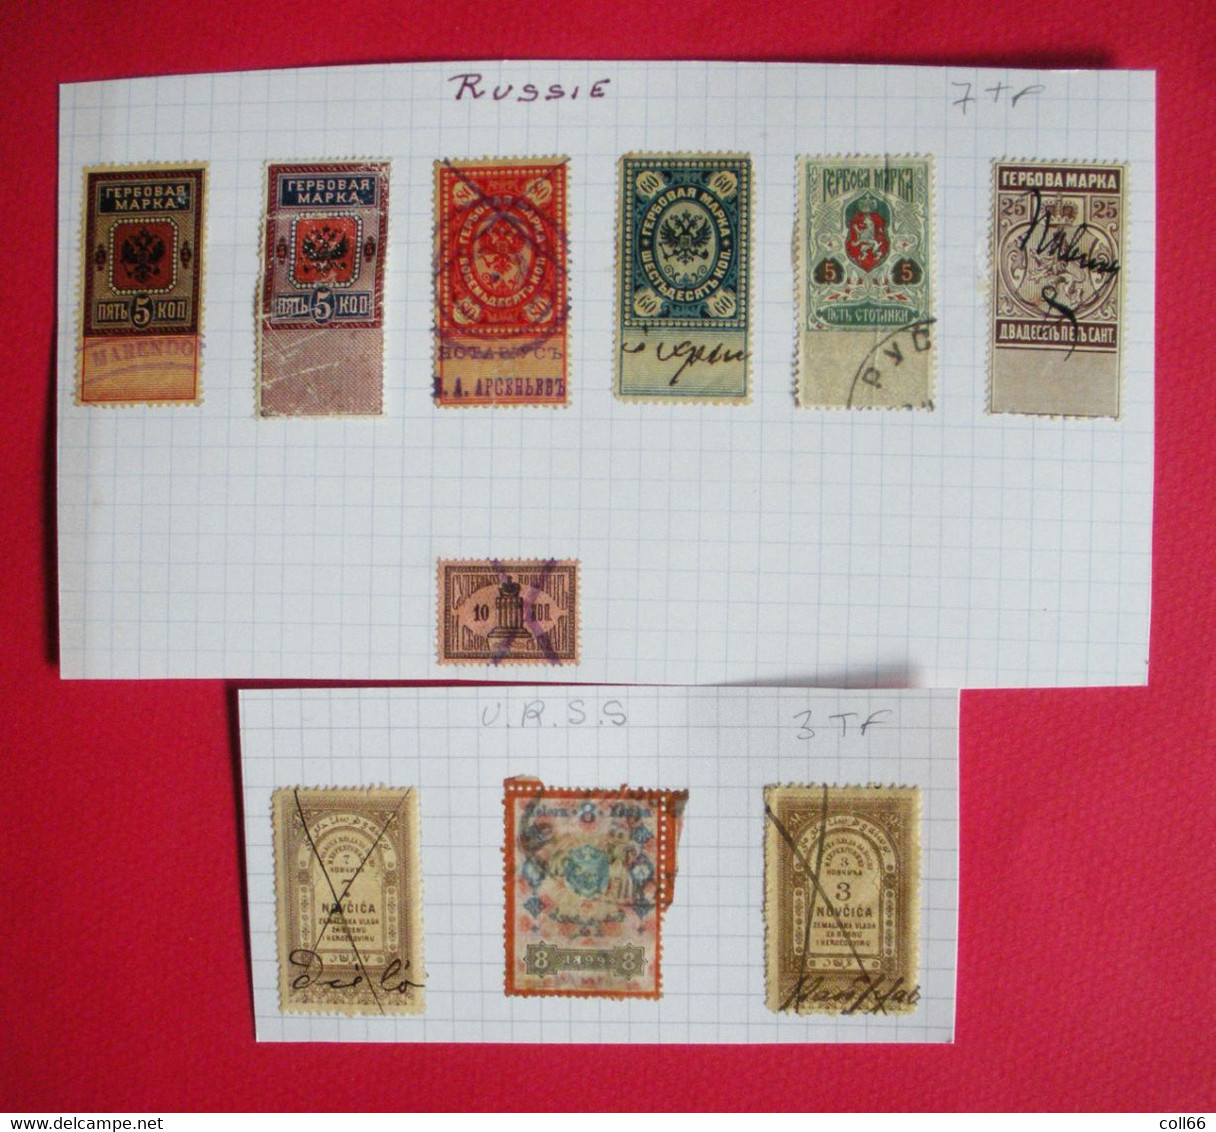 Russie URSS Collection De 10 Vieux Timbres Fiscaux Old Tax-Fiscal-Stamps Postage Included To Europa - Collections